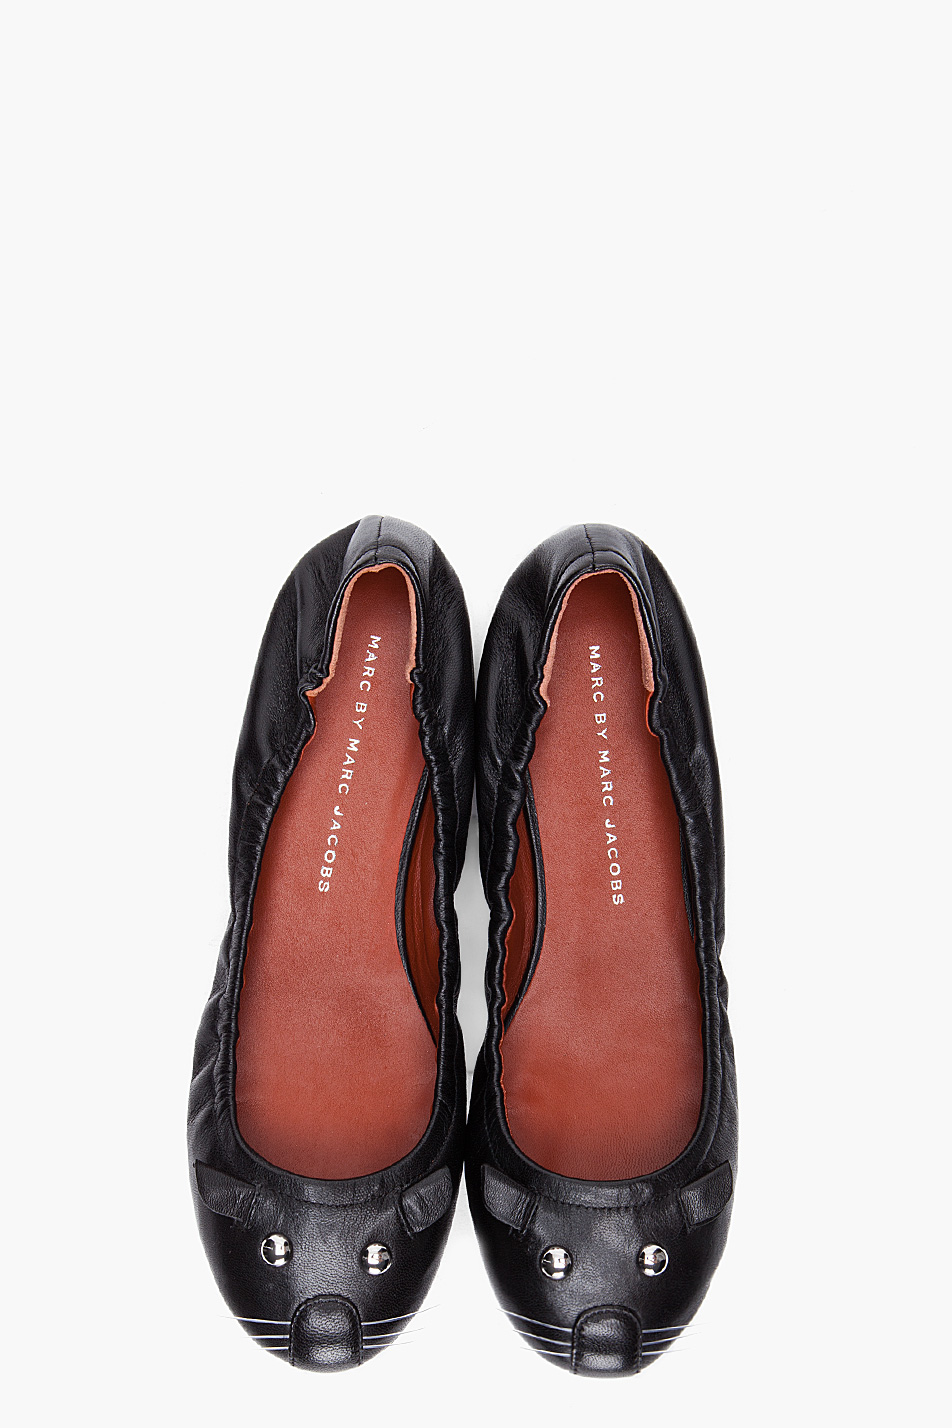 Marc By Marc Jacobs Flats Greece, SAVE 49% - aveclumiere.com